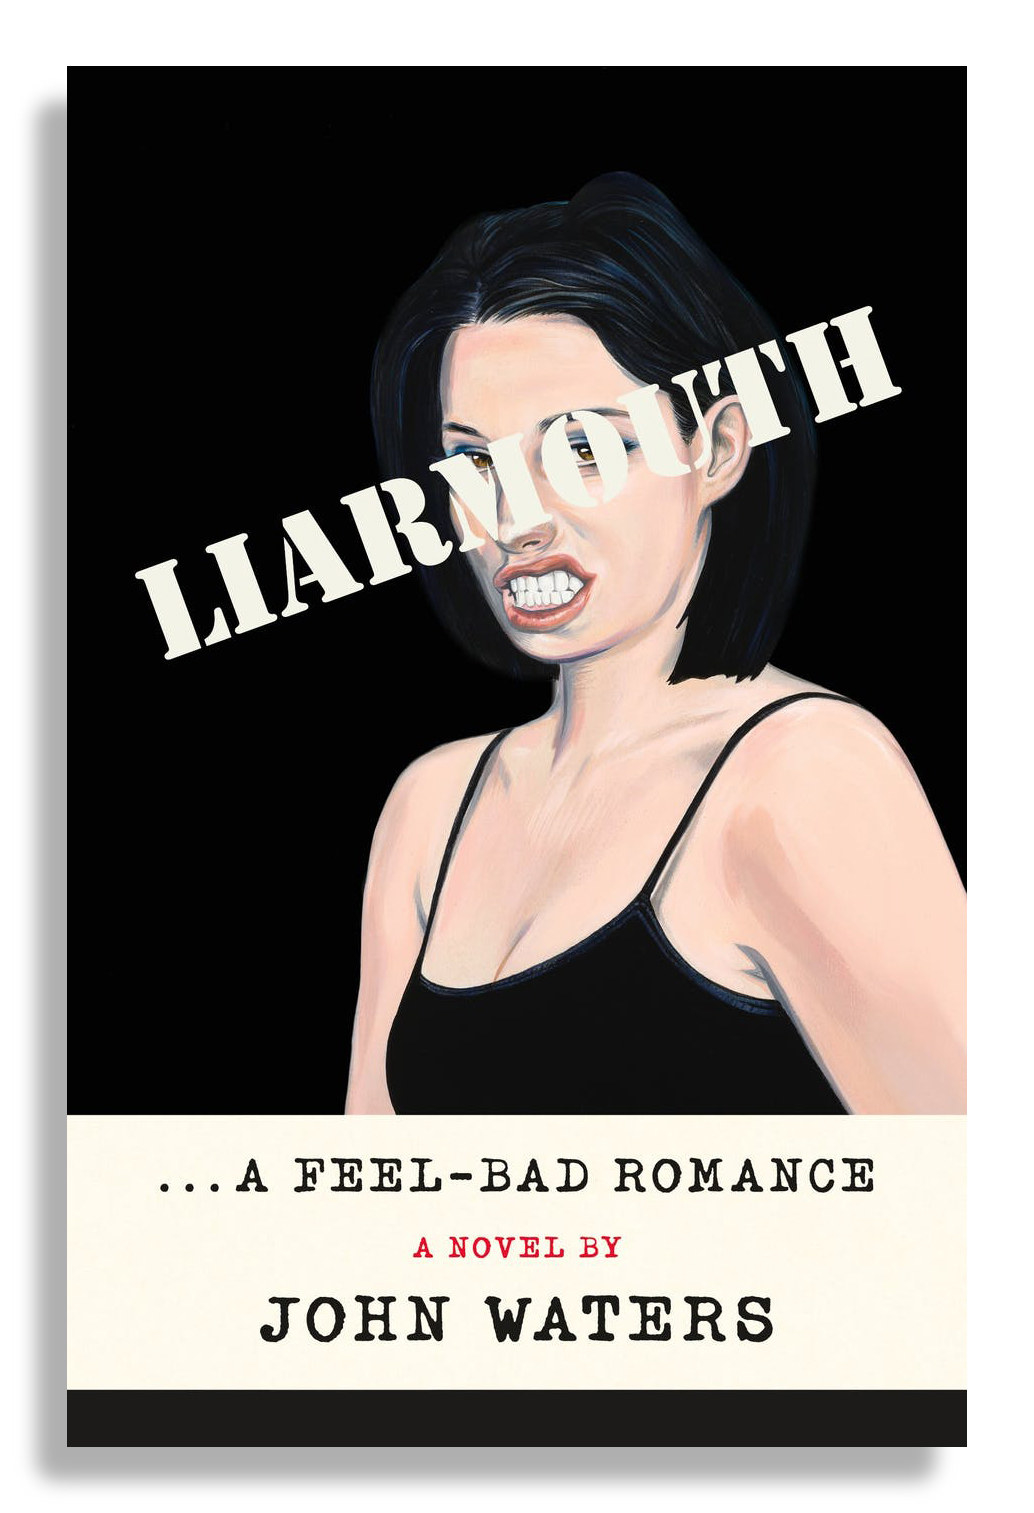 The cover of Liarmouth